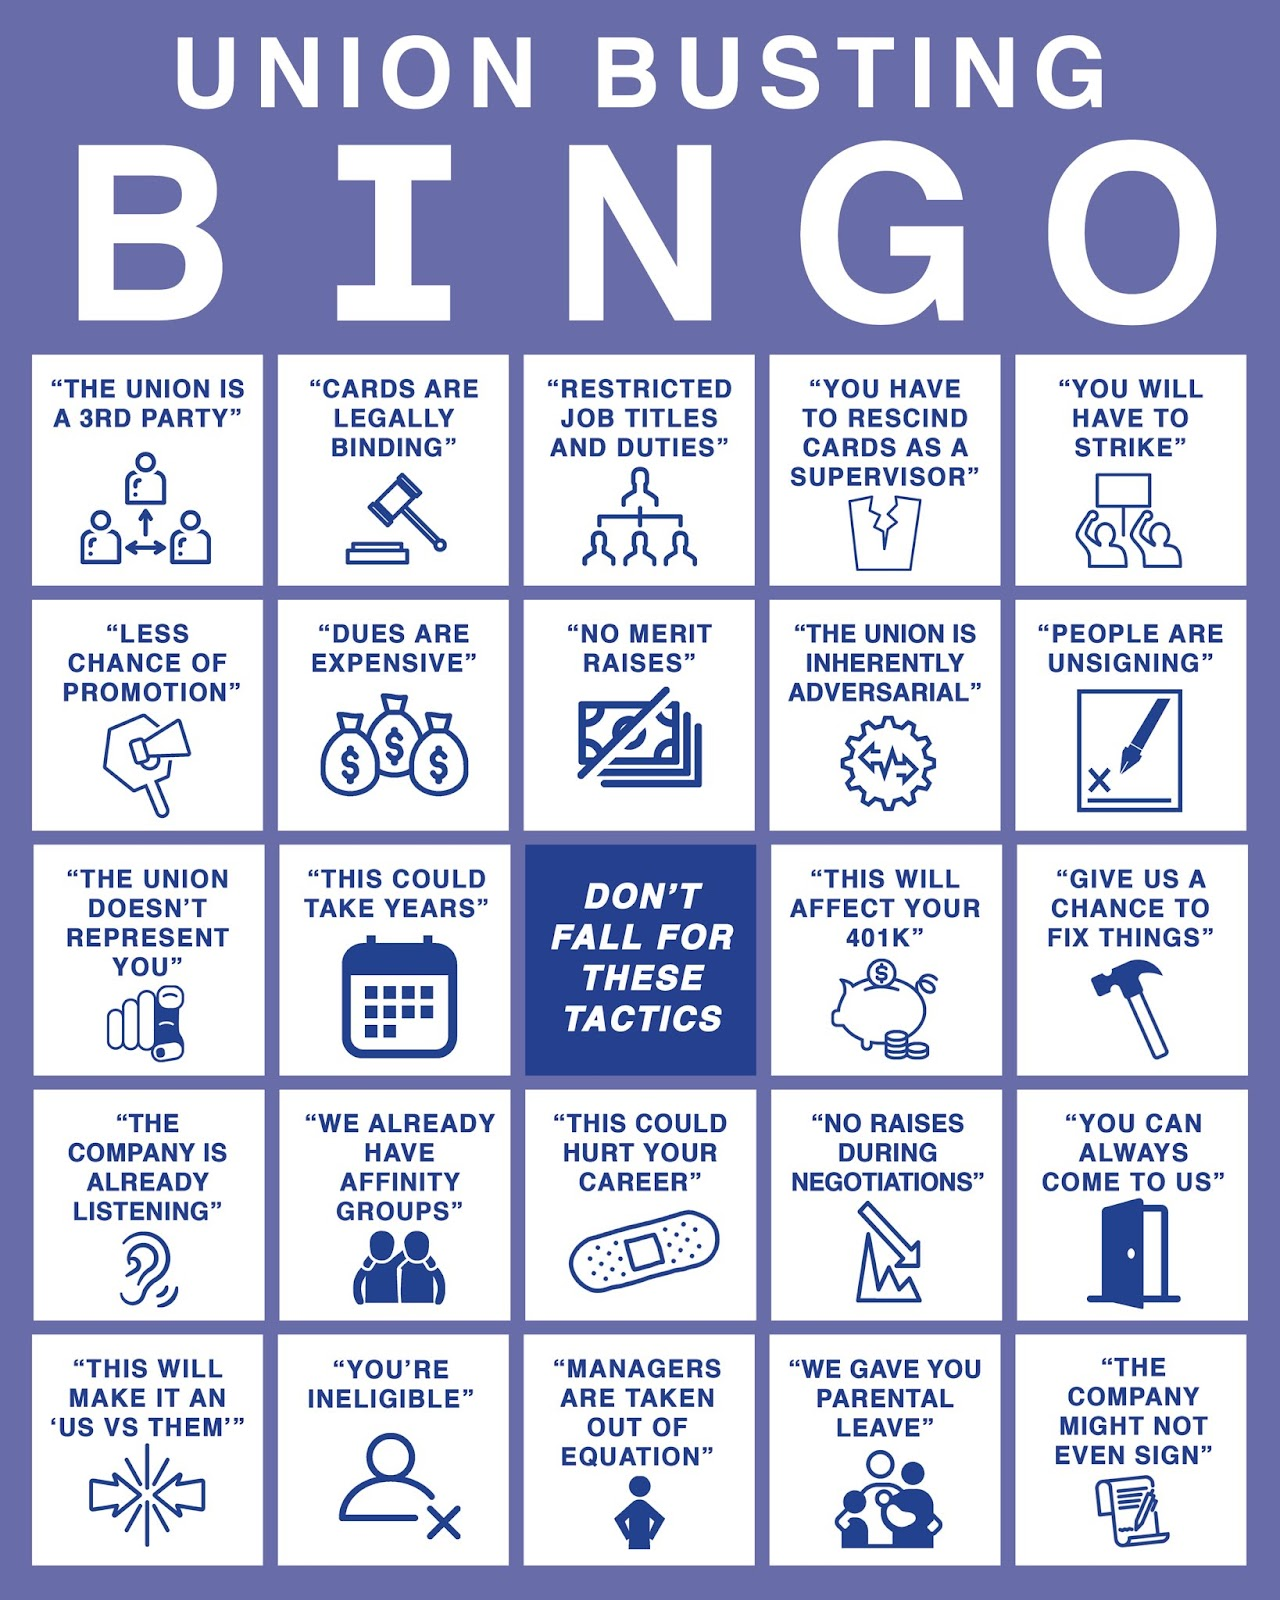 Bingo card: free space "Don't fall for these tactics". In order from top left to bottom right: The union is a third party; Cards are legally binding; Restricted job titles and duties; You have to rescind cards as a supervisor; You will have to strike; Less chance of promotion; Dues are expensive; No merit raises; The union is inherently adversarial; People are unsigning; The union doesn't represent you; This could take years; This will affect your 401K; Give us a chance to fix things; The company is already listening; We already have affinity groups; This could hurt your career; No raises during negotiations; You can always come to us; This will make it an Us vs. Them; You're ineligible; Managers are taken out of the equation; We gave you parental leave; The company might not even sign.